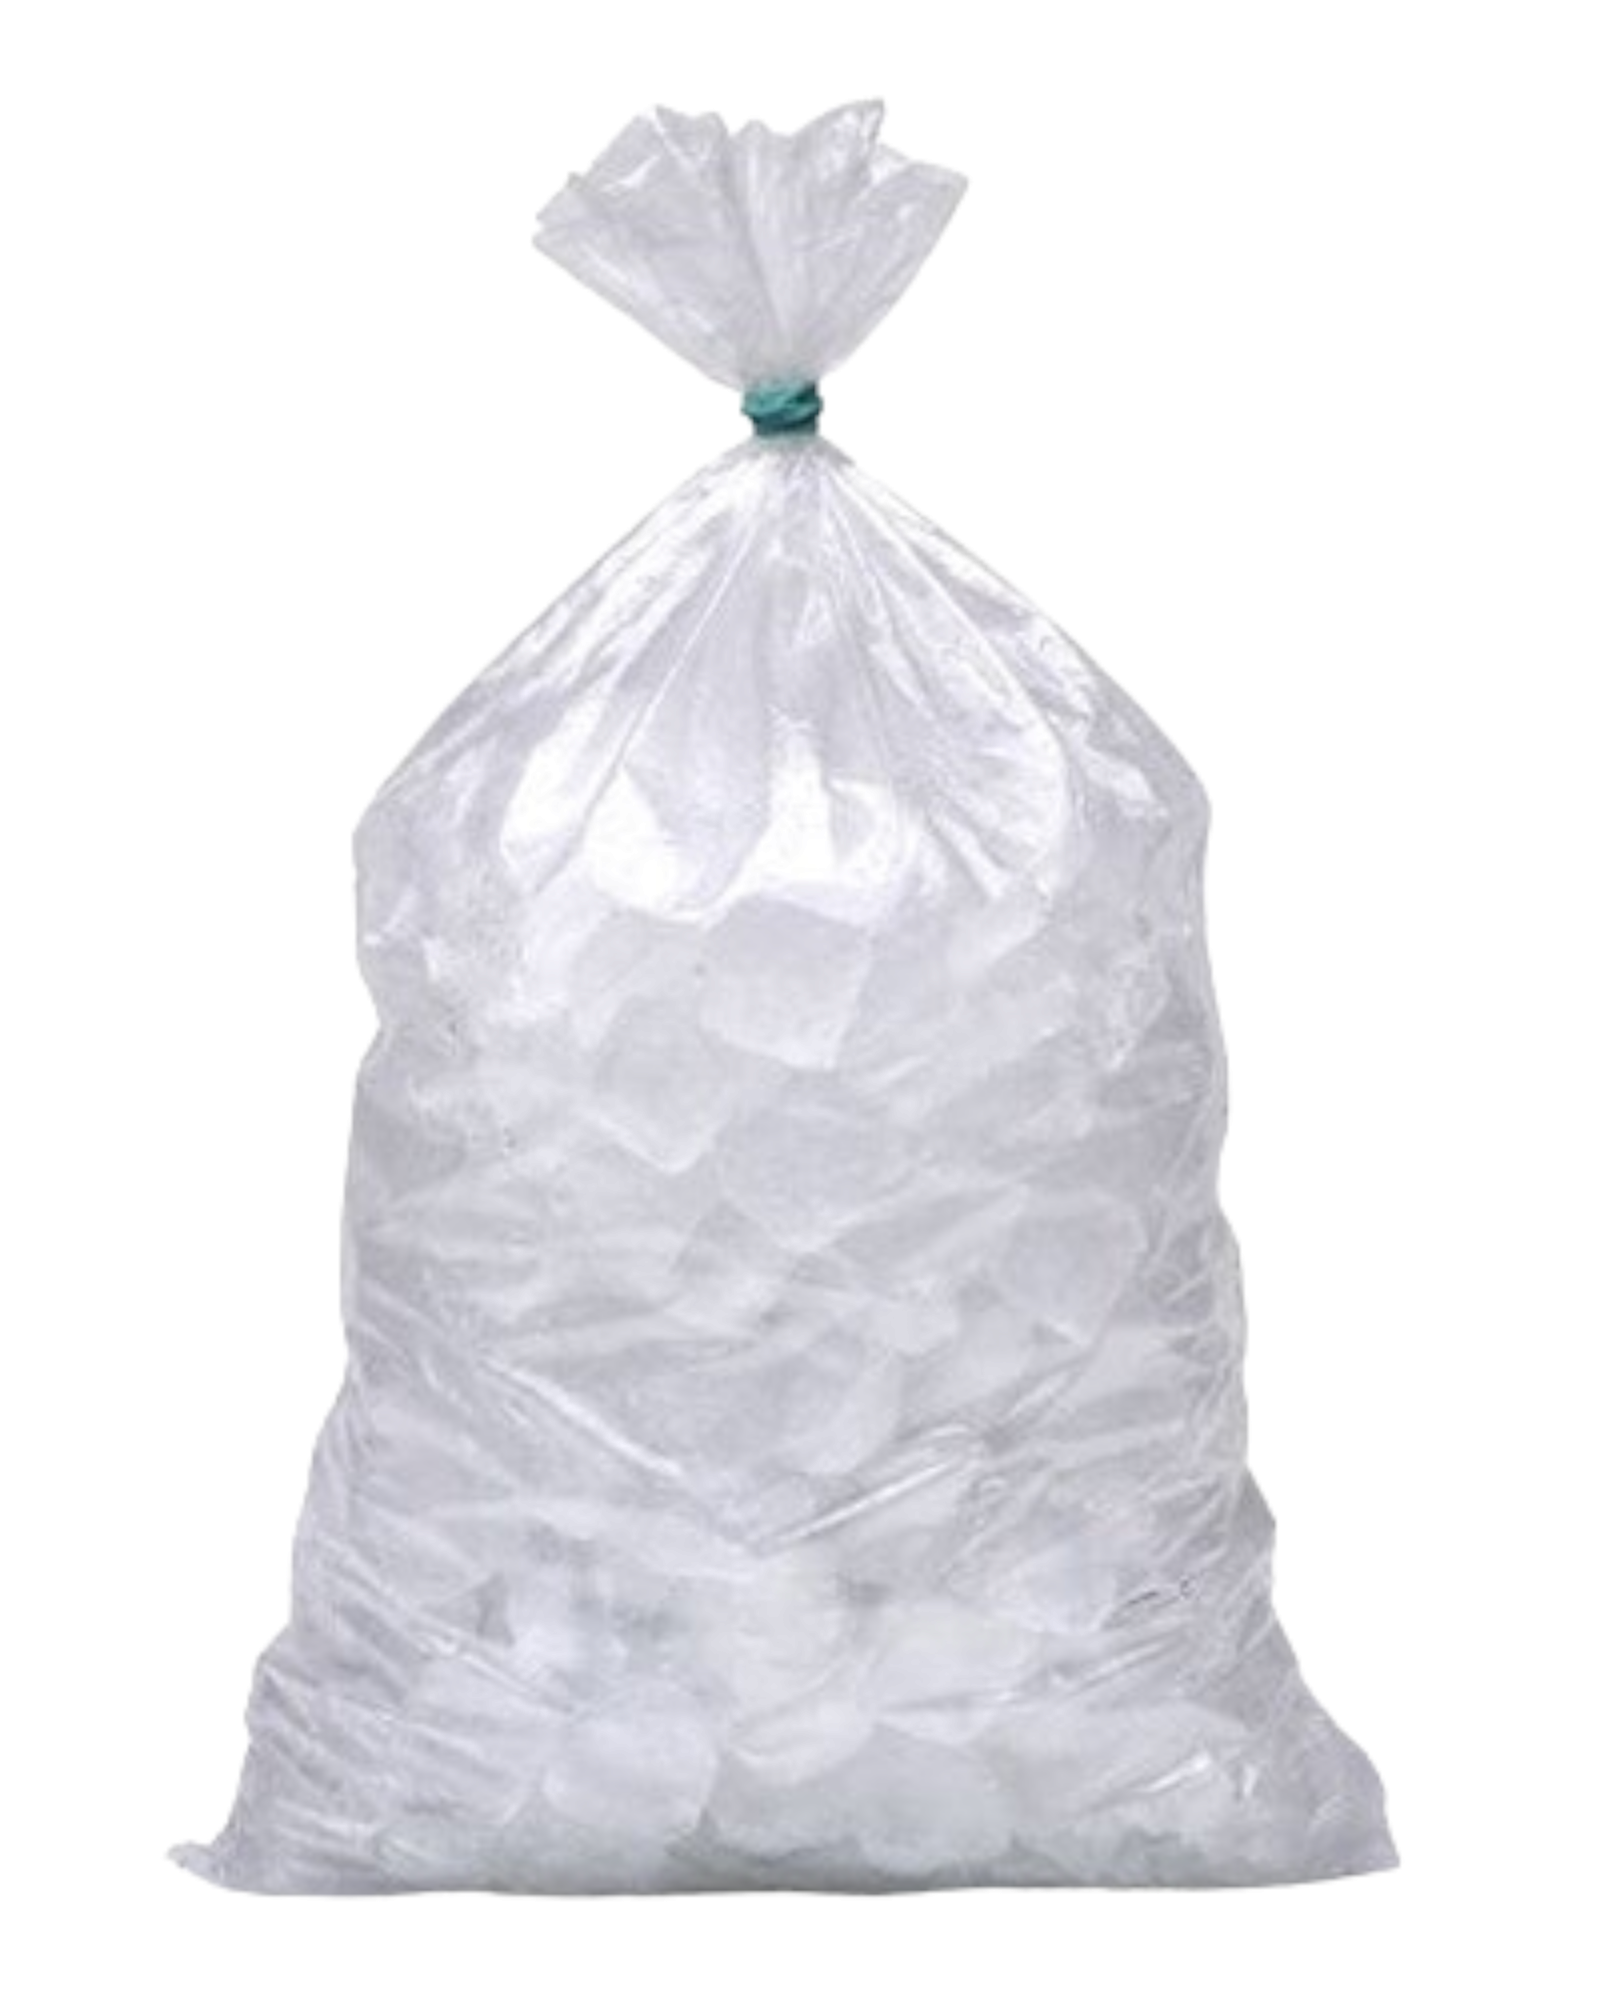 Plastic Bag 360x600mmx75mic 10kg Clear - 100pack (Ice Cubes)